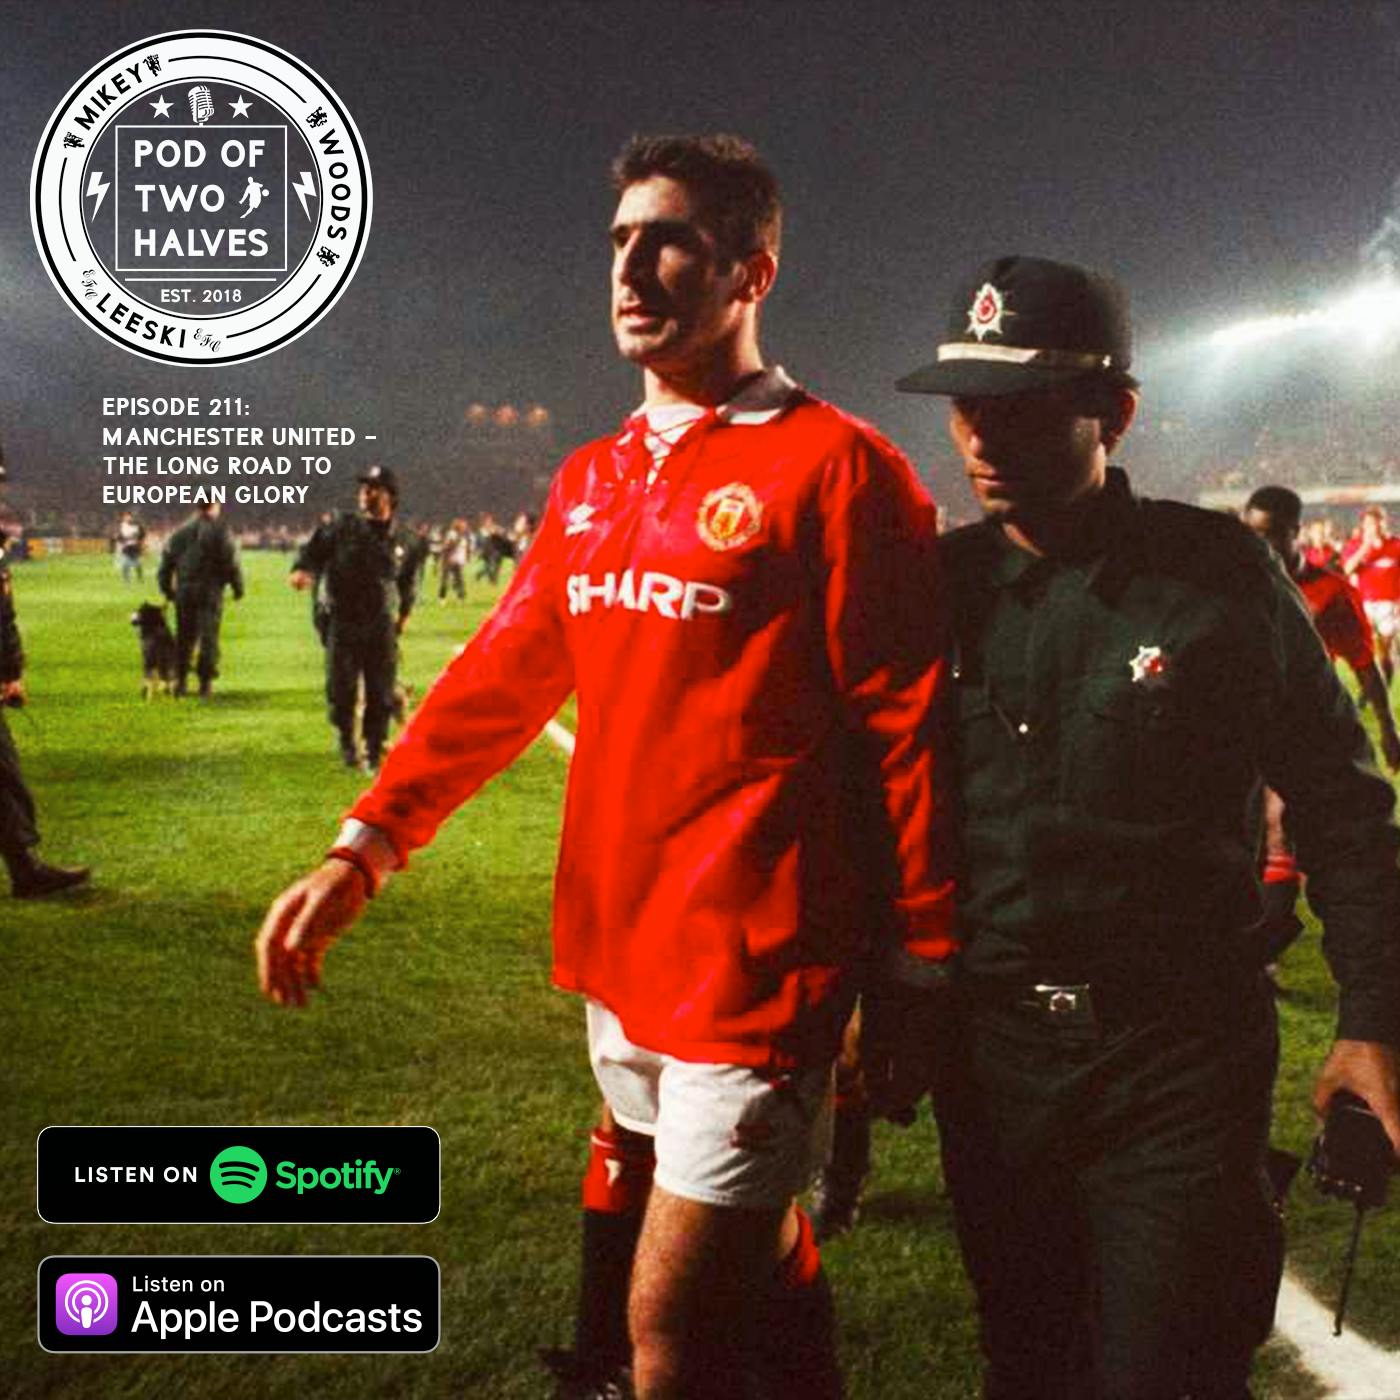 Episode 211: Manchester United - The Long Road To European Glory ⭐️